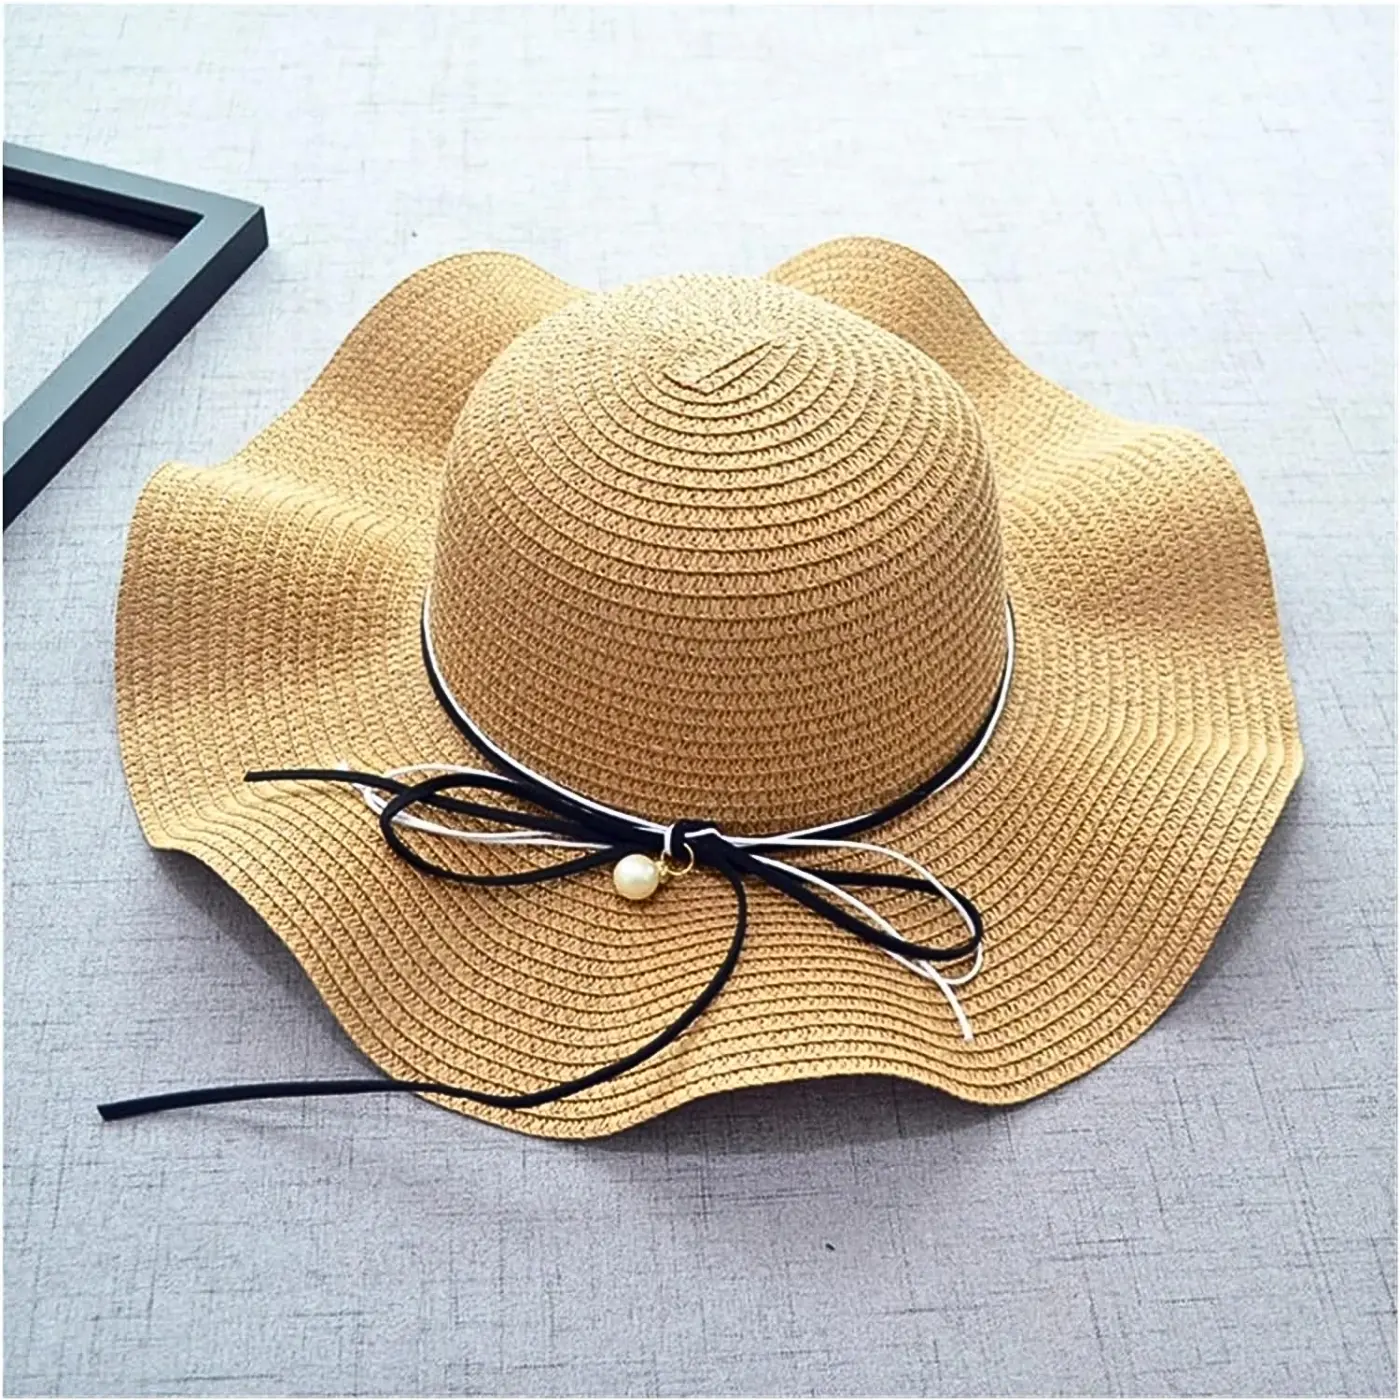 Large Foldable Women's Beach Cap with Bowknot Pearl Sunshade Hat for Casual Outdoor Adventures Provides Side Sun Protection